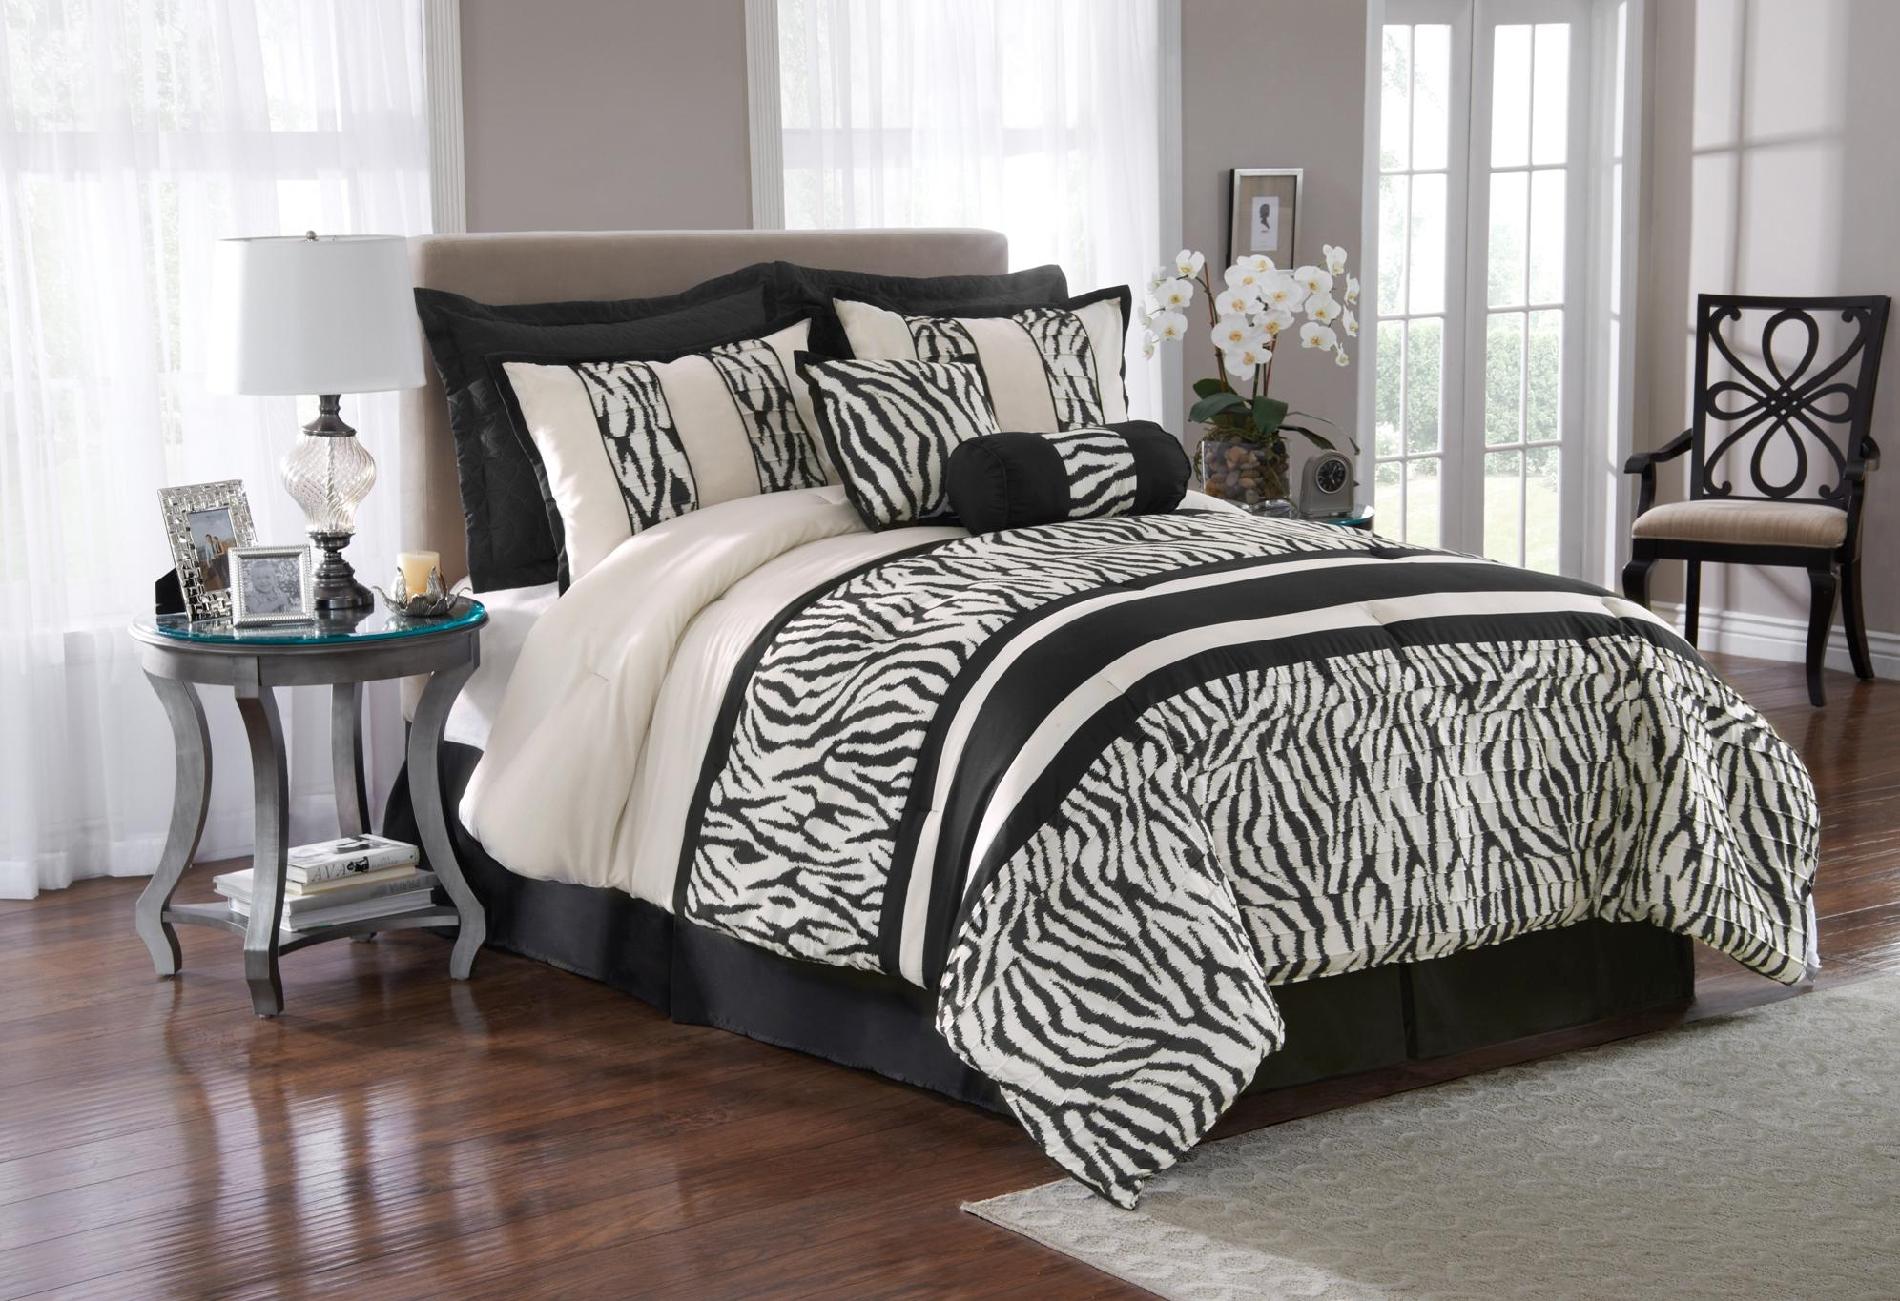 8-Piece Bedding Sets From $23.99!